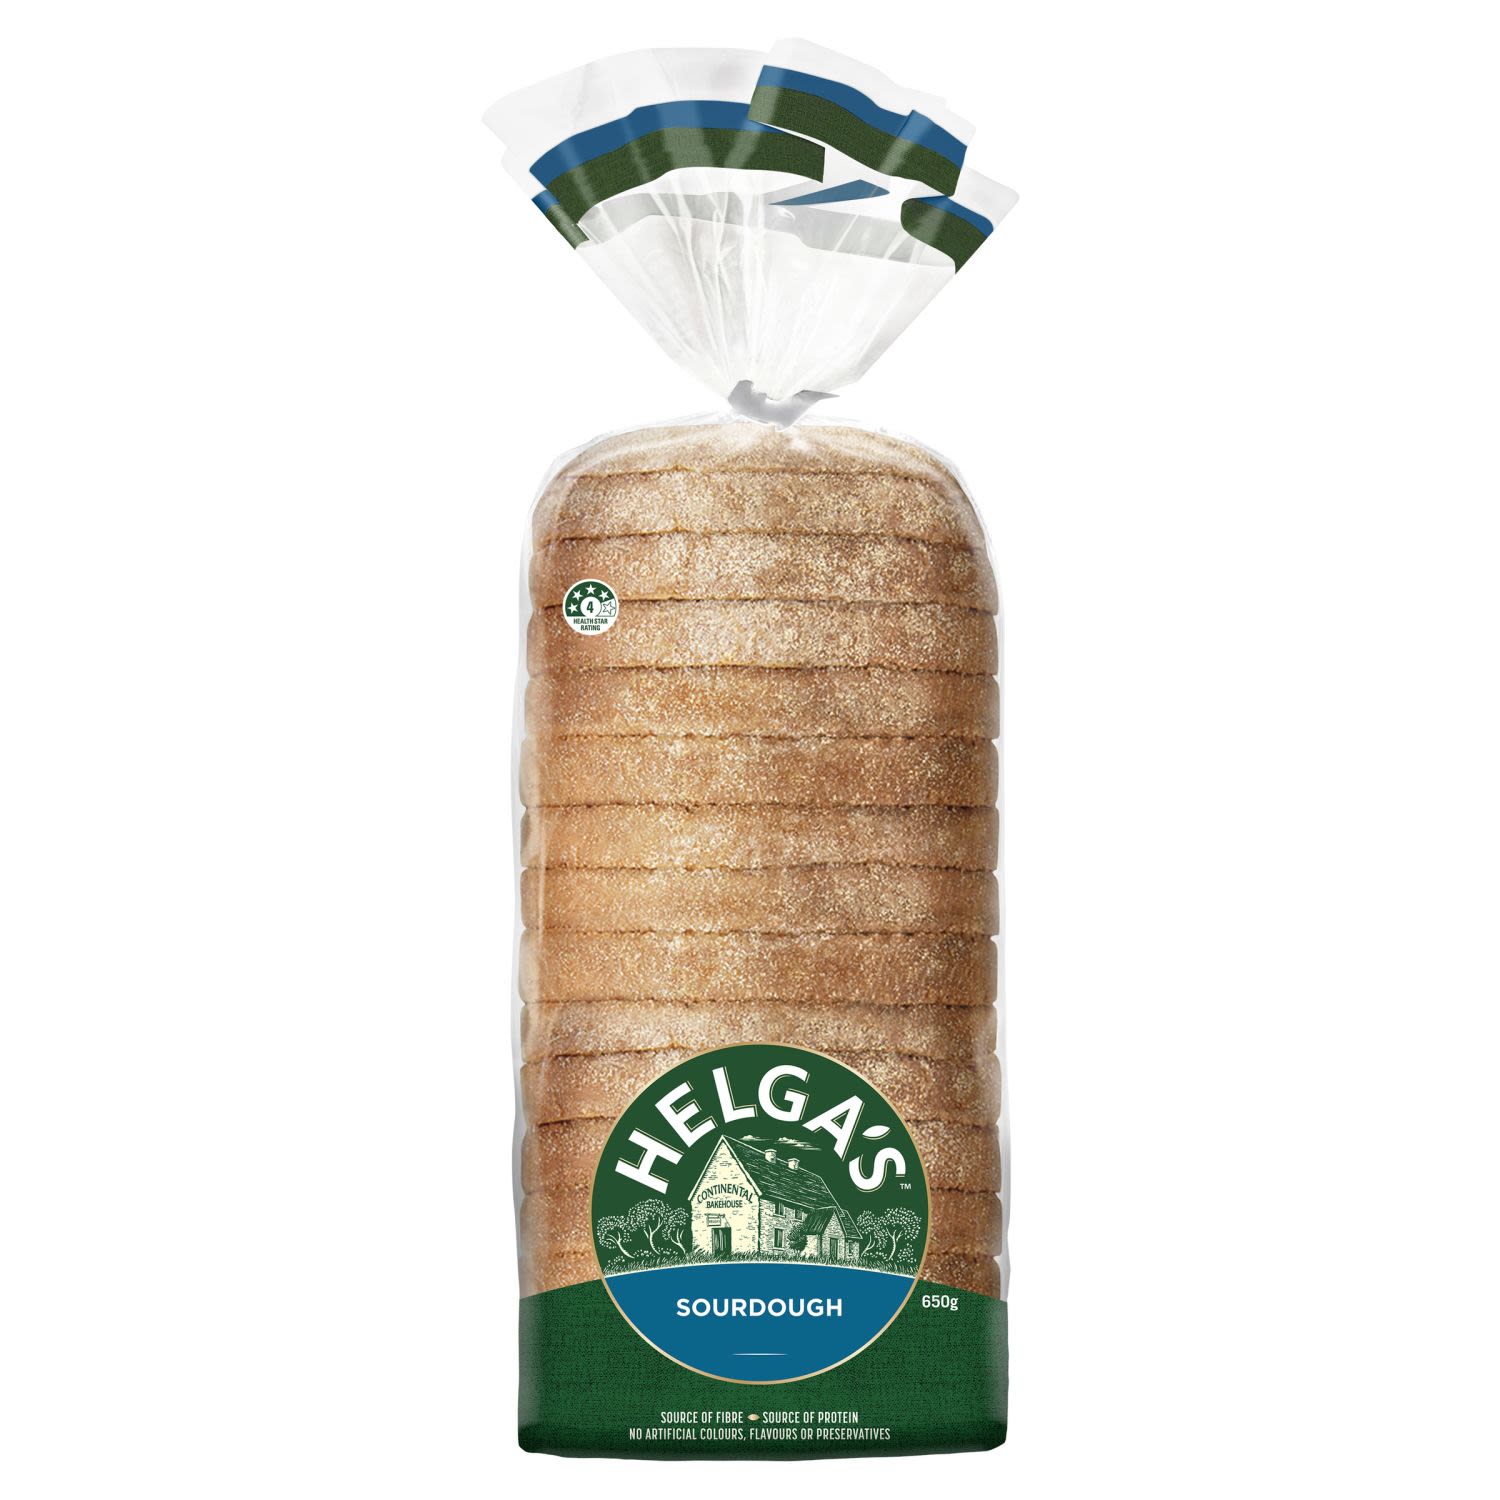 Upgrade your bread to Helga's Sourdough Bread. Crafted with no artificial colours, flavours and preservatives, it is perfect for sandwiches or toast. You can also enjoy it as an accompaniment to meals like salads, soups or pasta.<br /> <br /> <br /><br />Allergen: Gluten Containing Cereals| Soy| Sesame<br />Allergen may be present: Soy|Gluten Containing Cereals <br /><br />Country of Origin: Made in Australia from at least 90% Australian ingredients